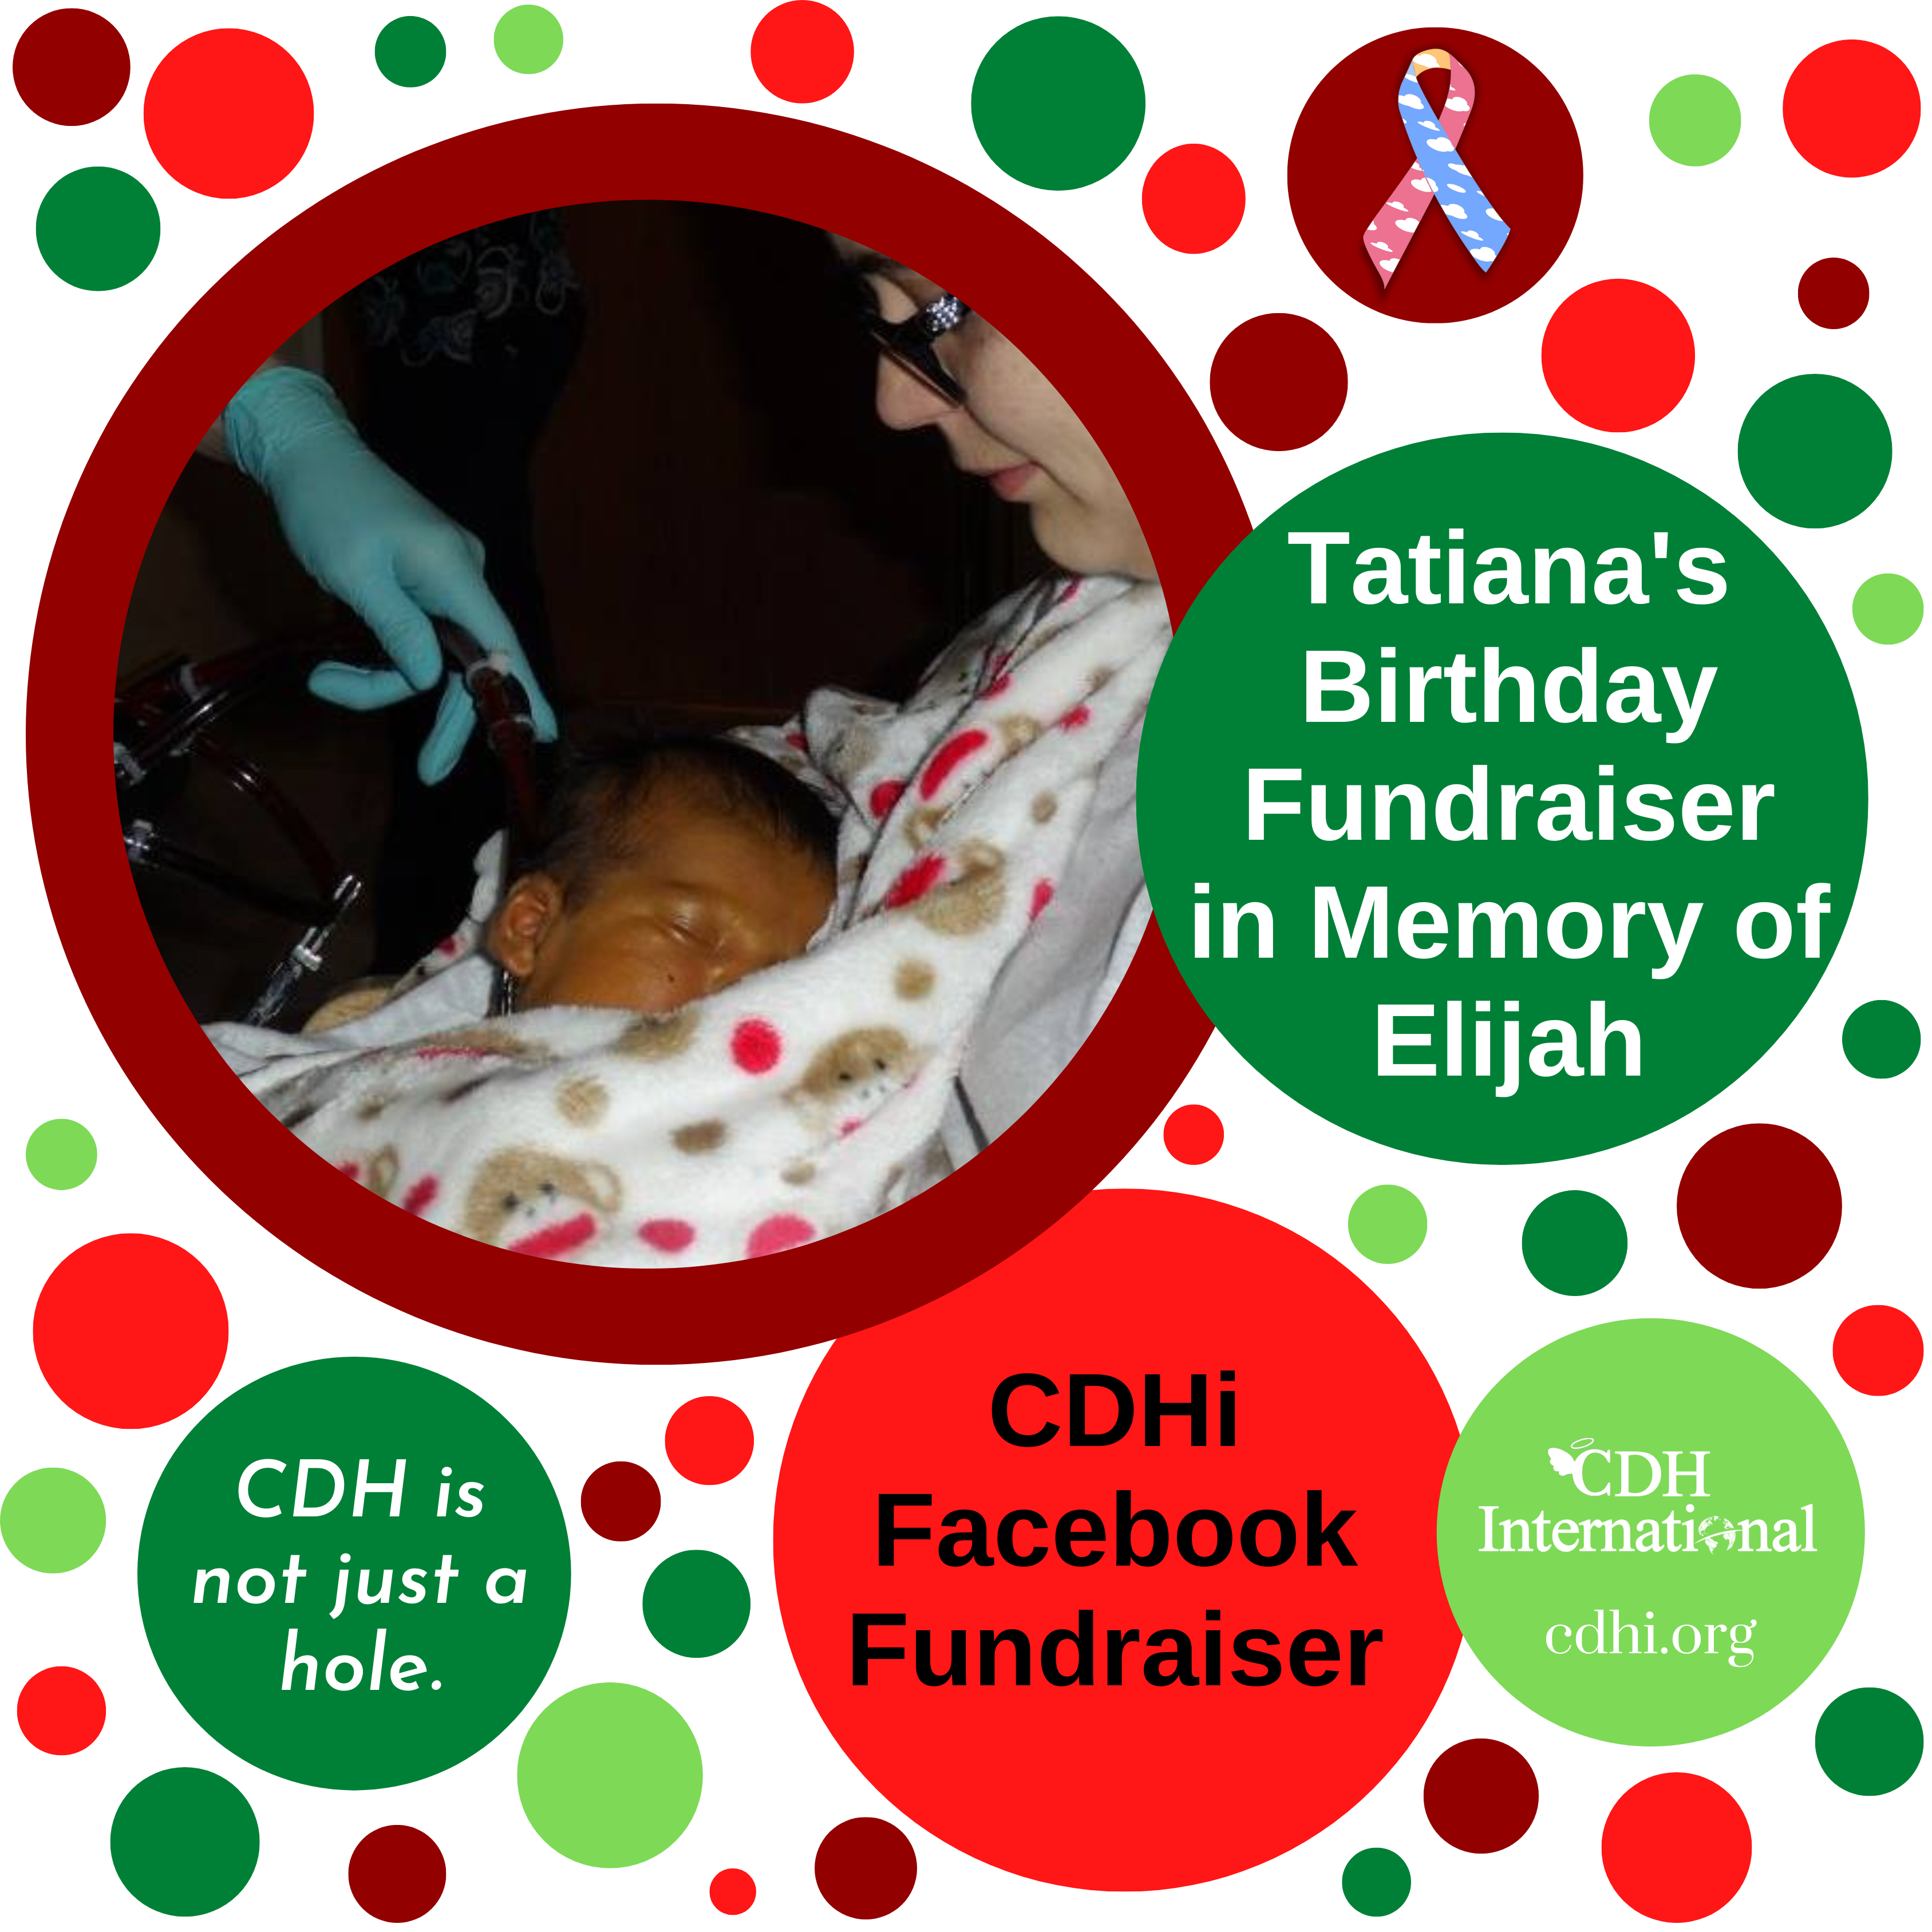 Mindy’s fundraiser for CDHi in honor of Matthew